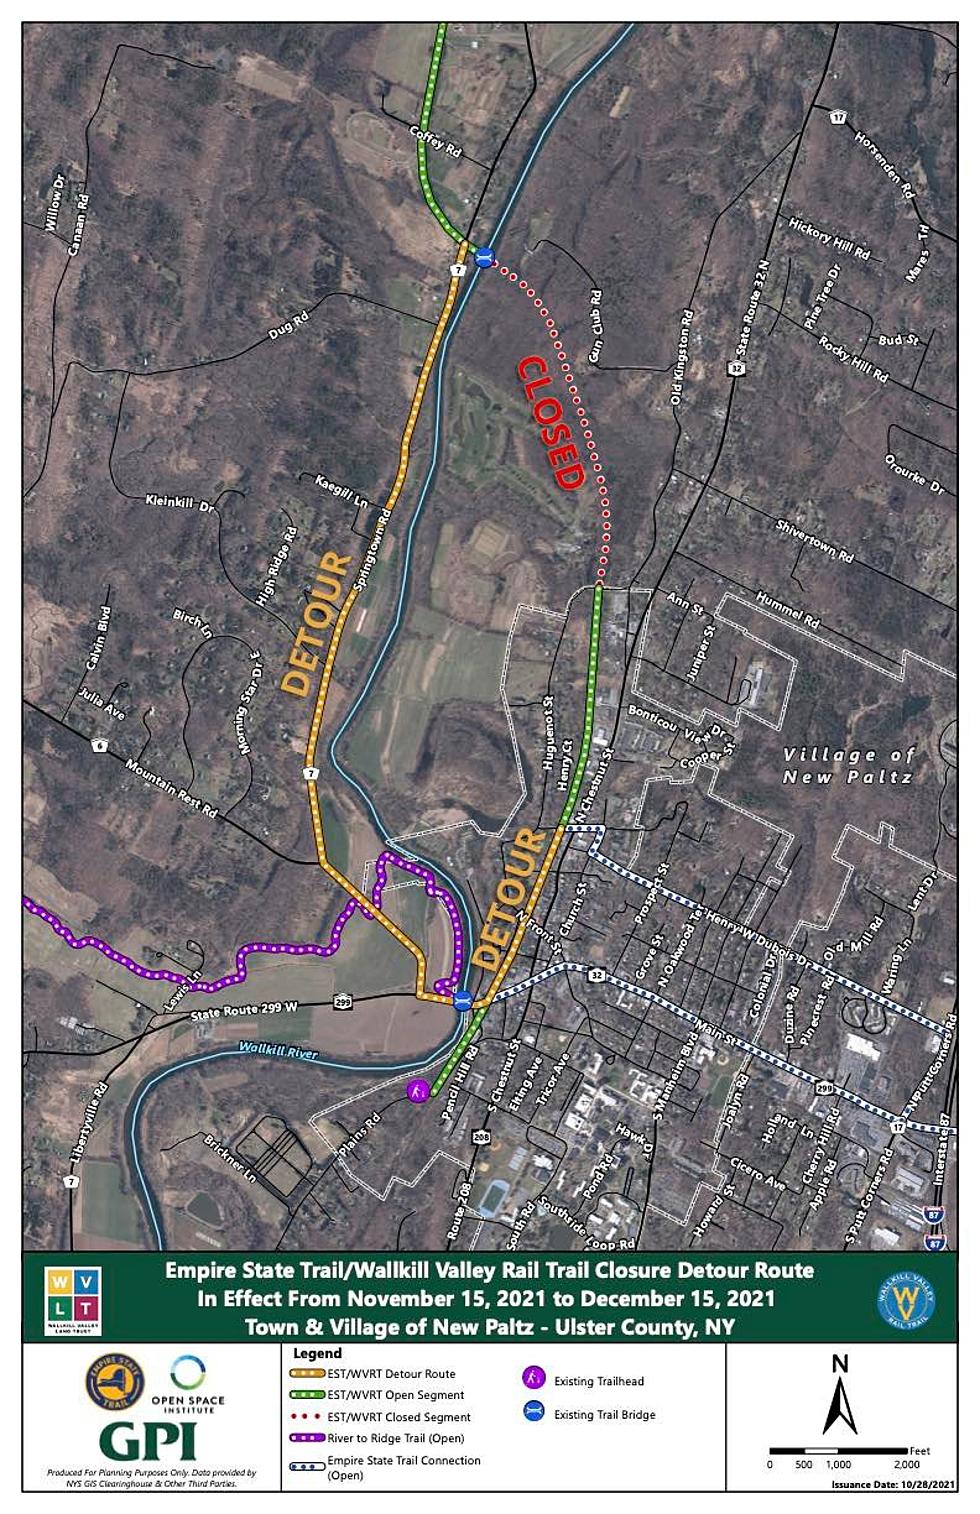 Popular Part of Wallkill Valley Rail Trail in New Paltz Will Be Closed